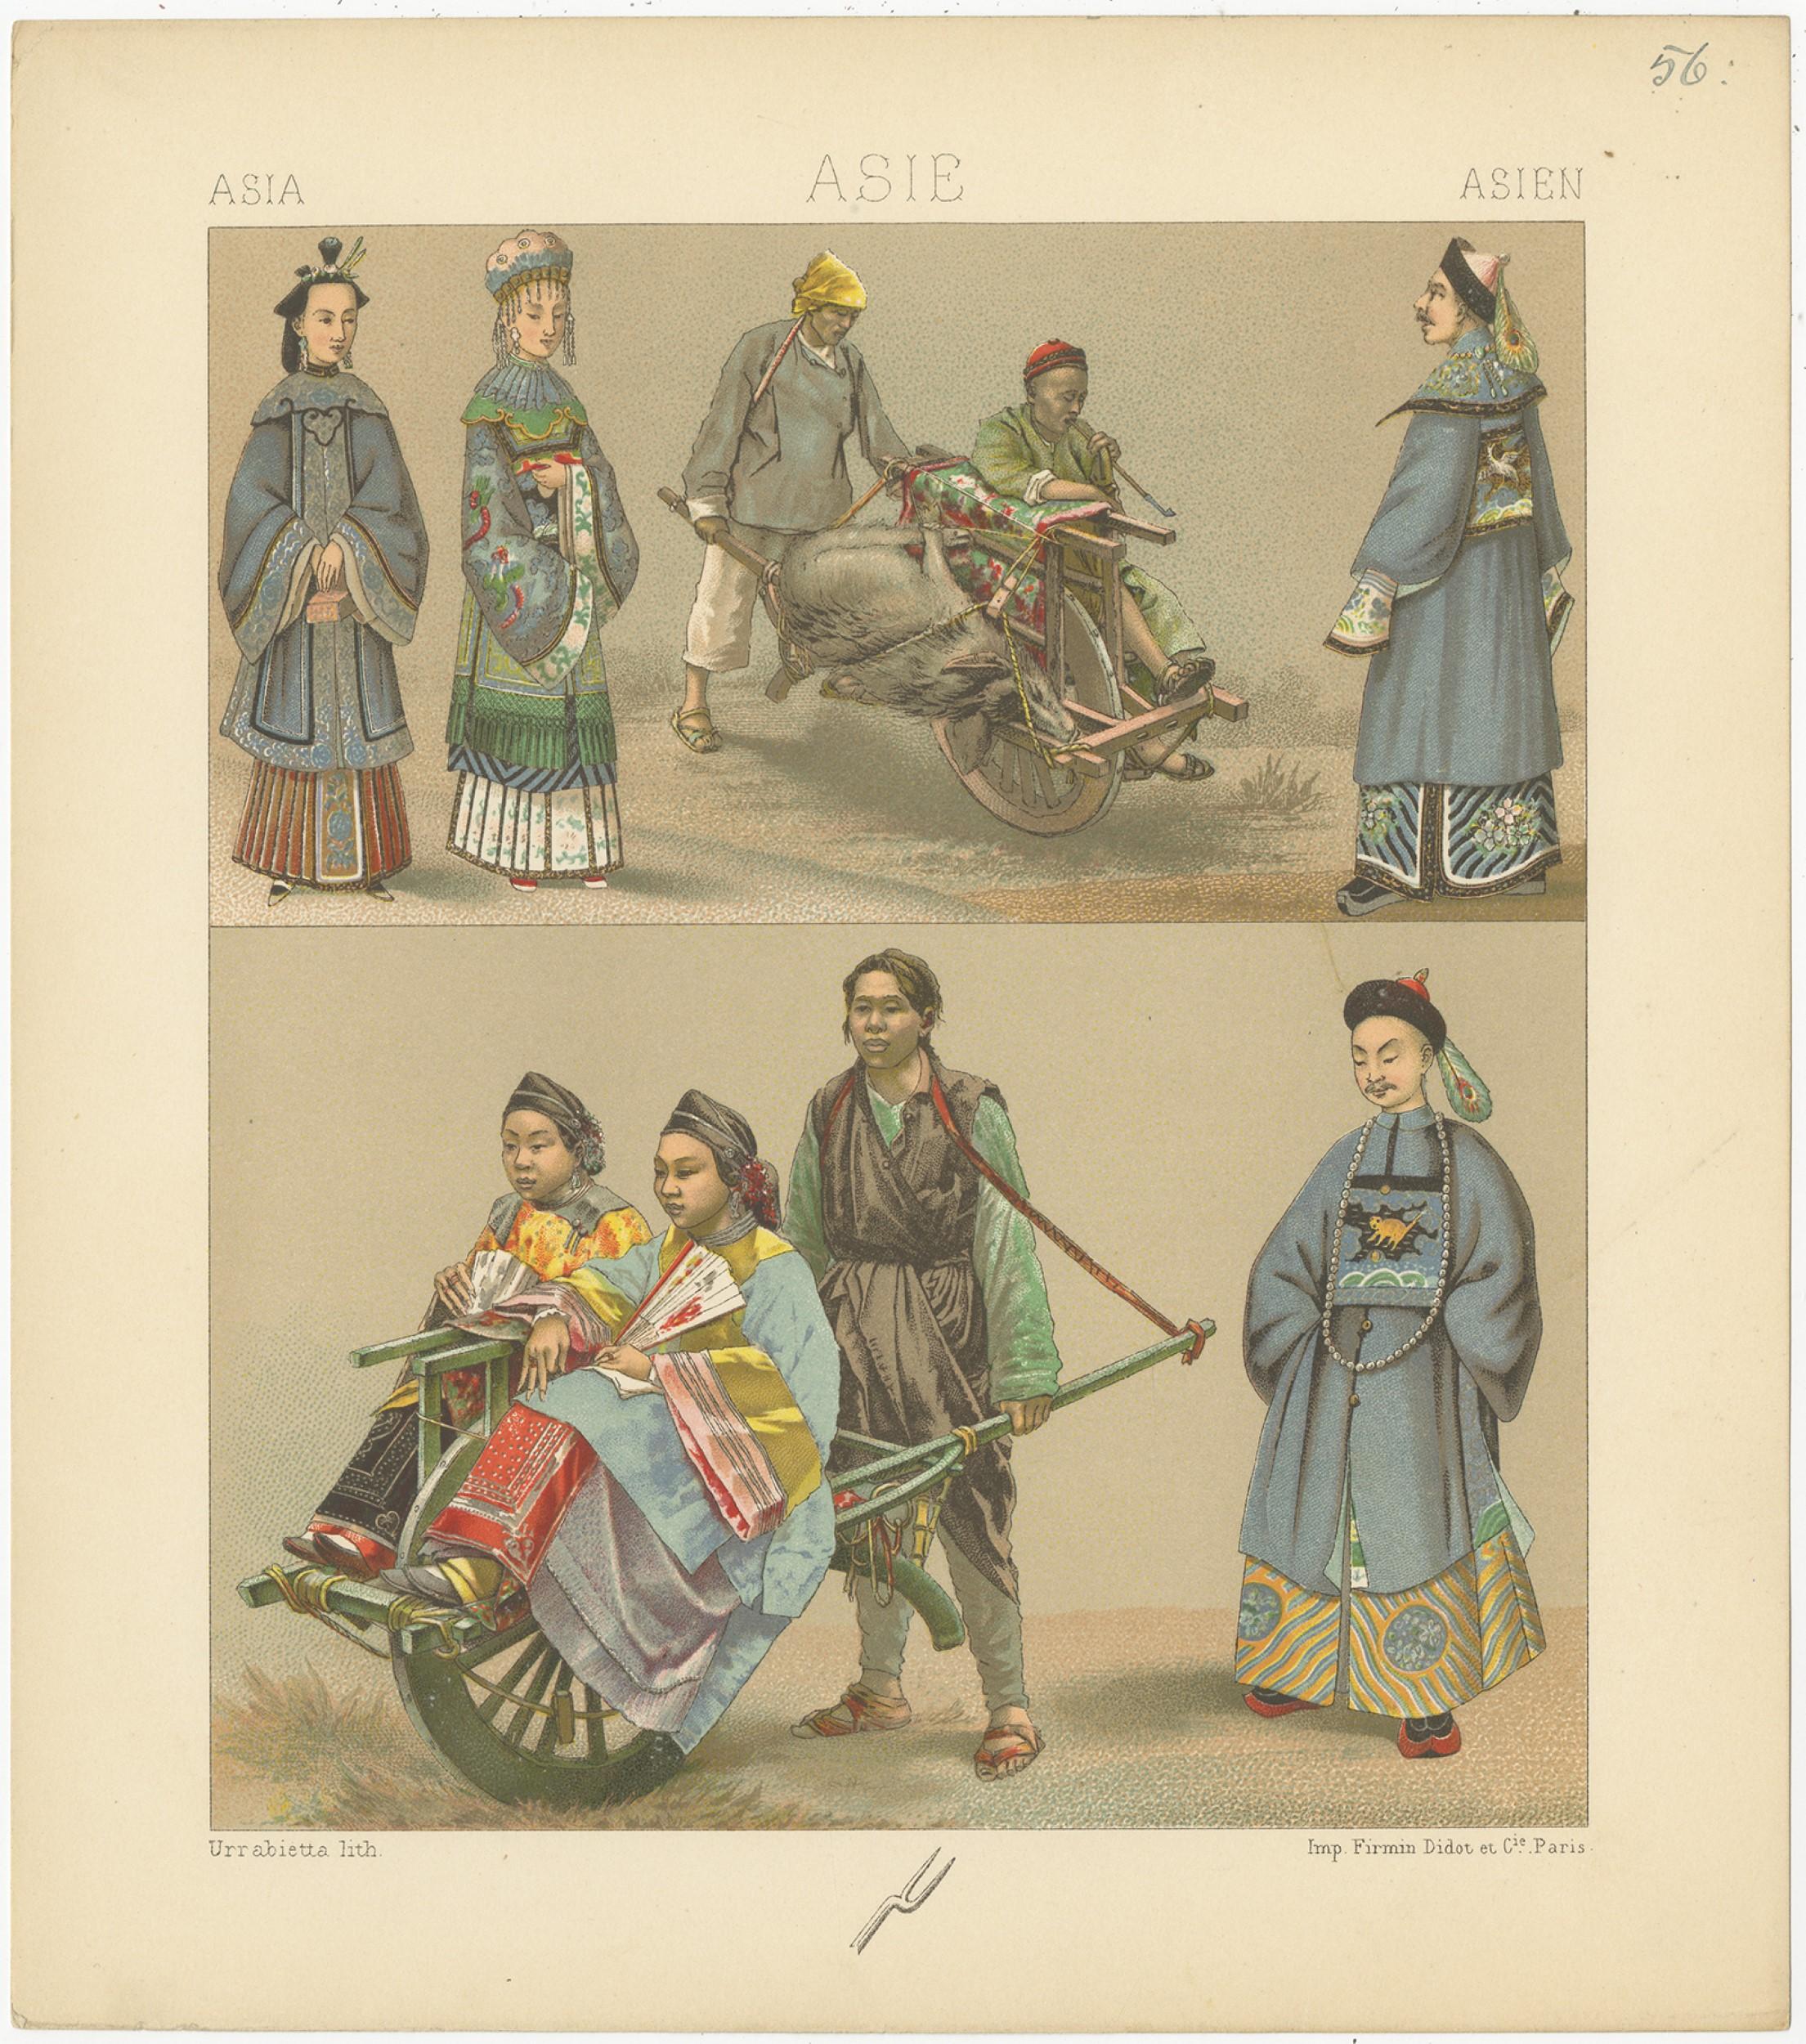 Antique print titled 'Asia - Asie - Asien'. Chromolithograph of Asian costumes. This print originates from 'Le Costume Historique' by M.A. Racinet. Published, circa 1880.